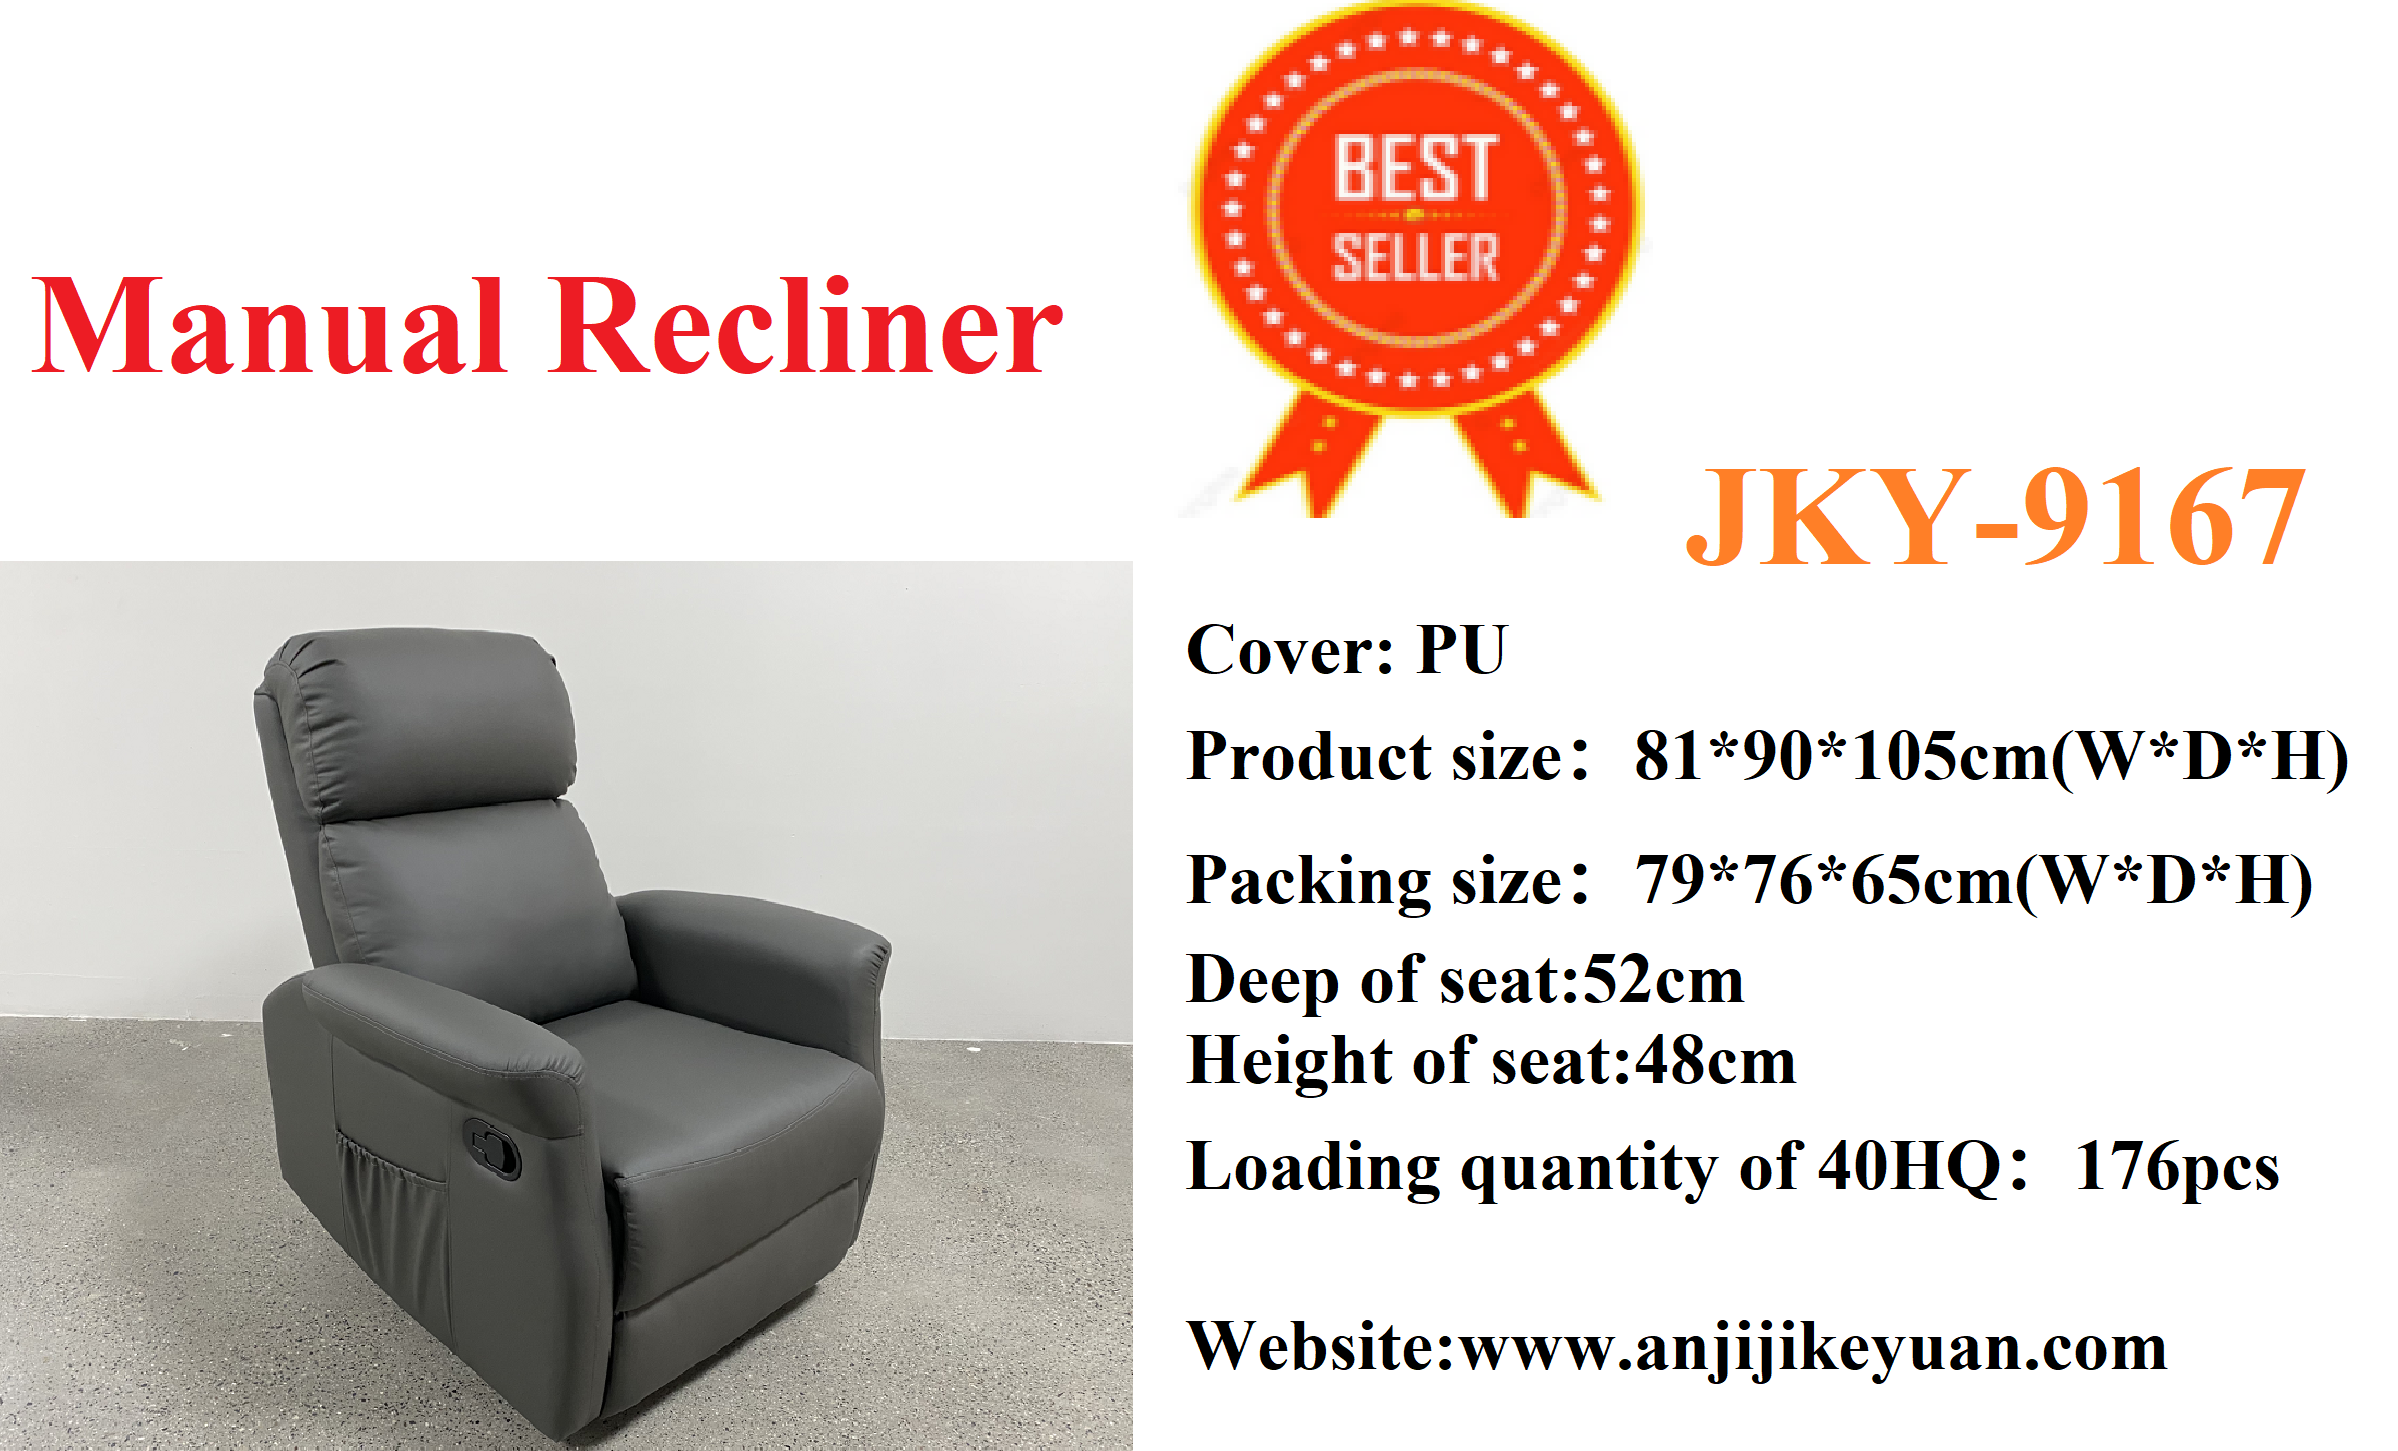 Hot Sale Of Manual Recliner For Christmas！